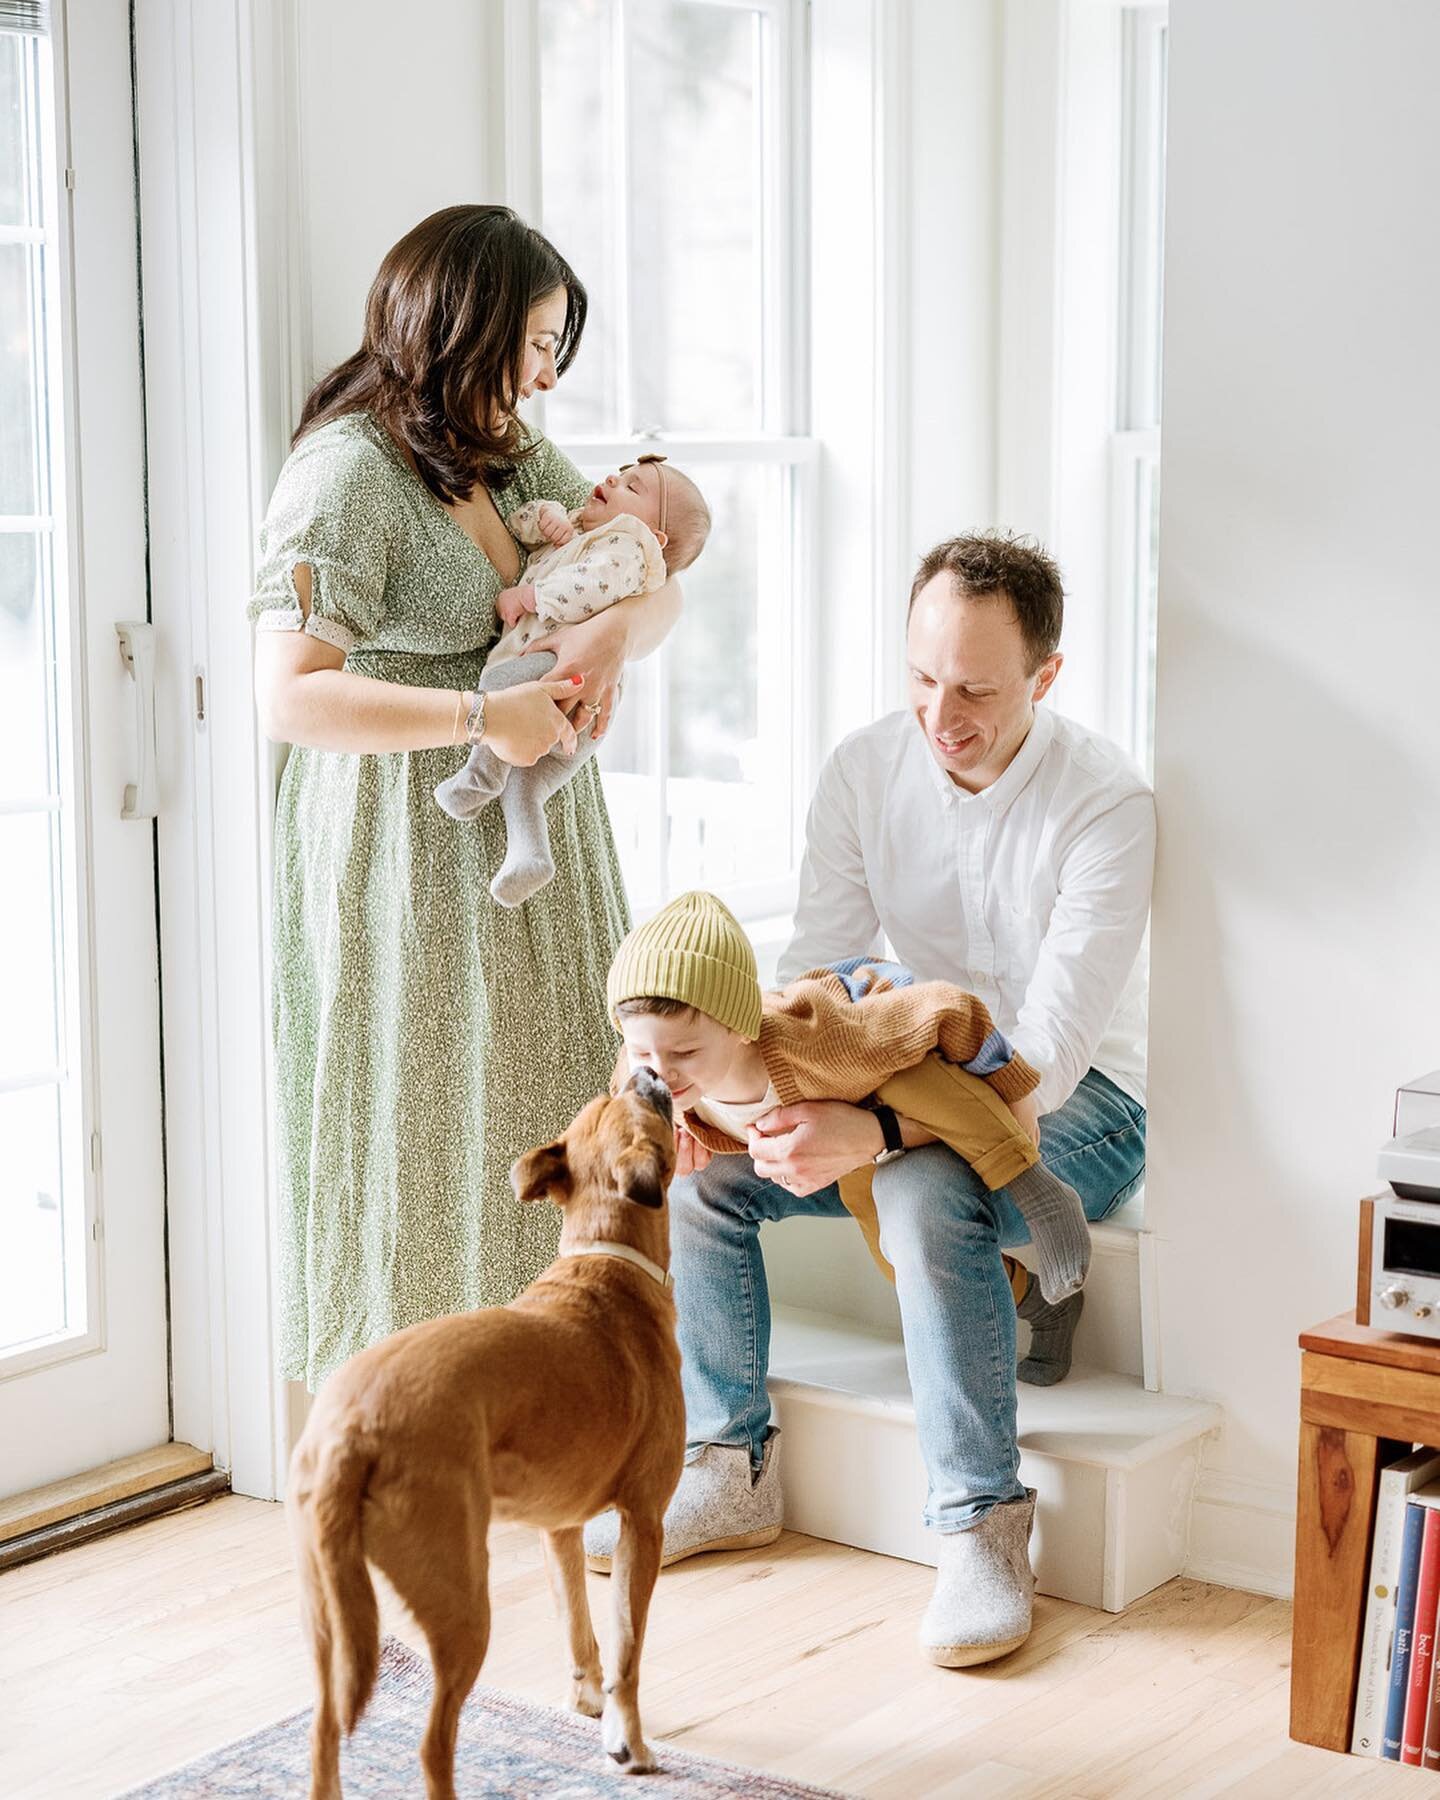 &ldquo;Family is not an important thing. It&rsquo;s everything.&rdquo; &ndash;Michael J. Fox
⠀⠀⠀⠀⠀⠀⠀⠀⠀
On the blog is this adorable family session at home in Saratoga Springs. Head on over to see more of my favorites!